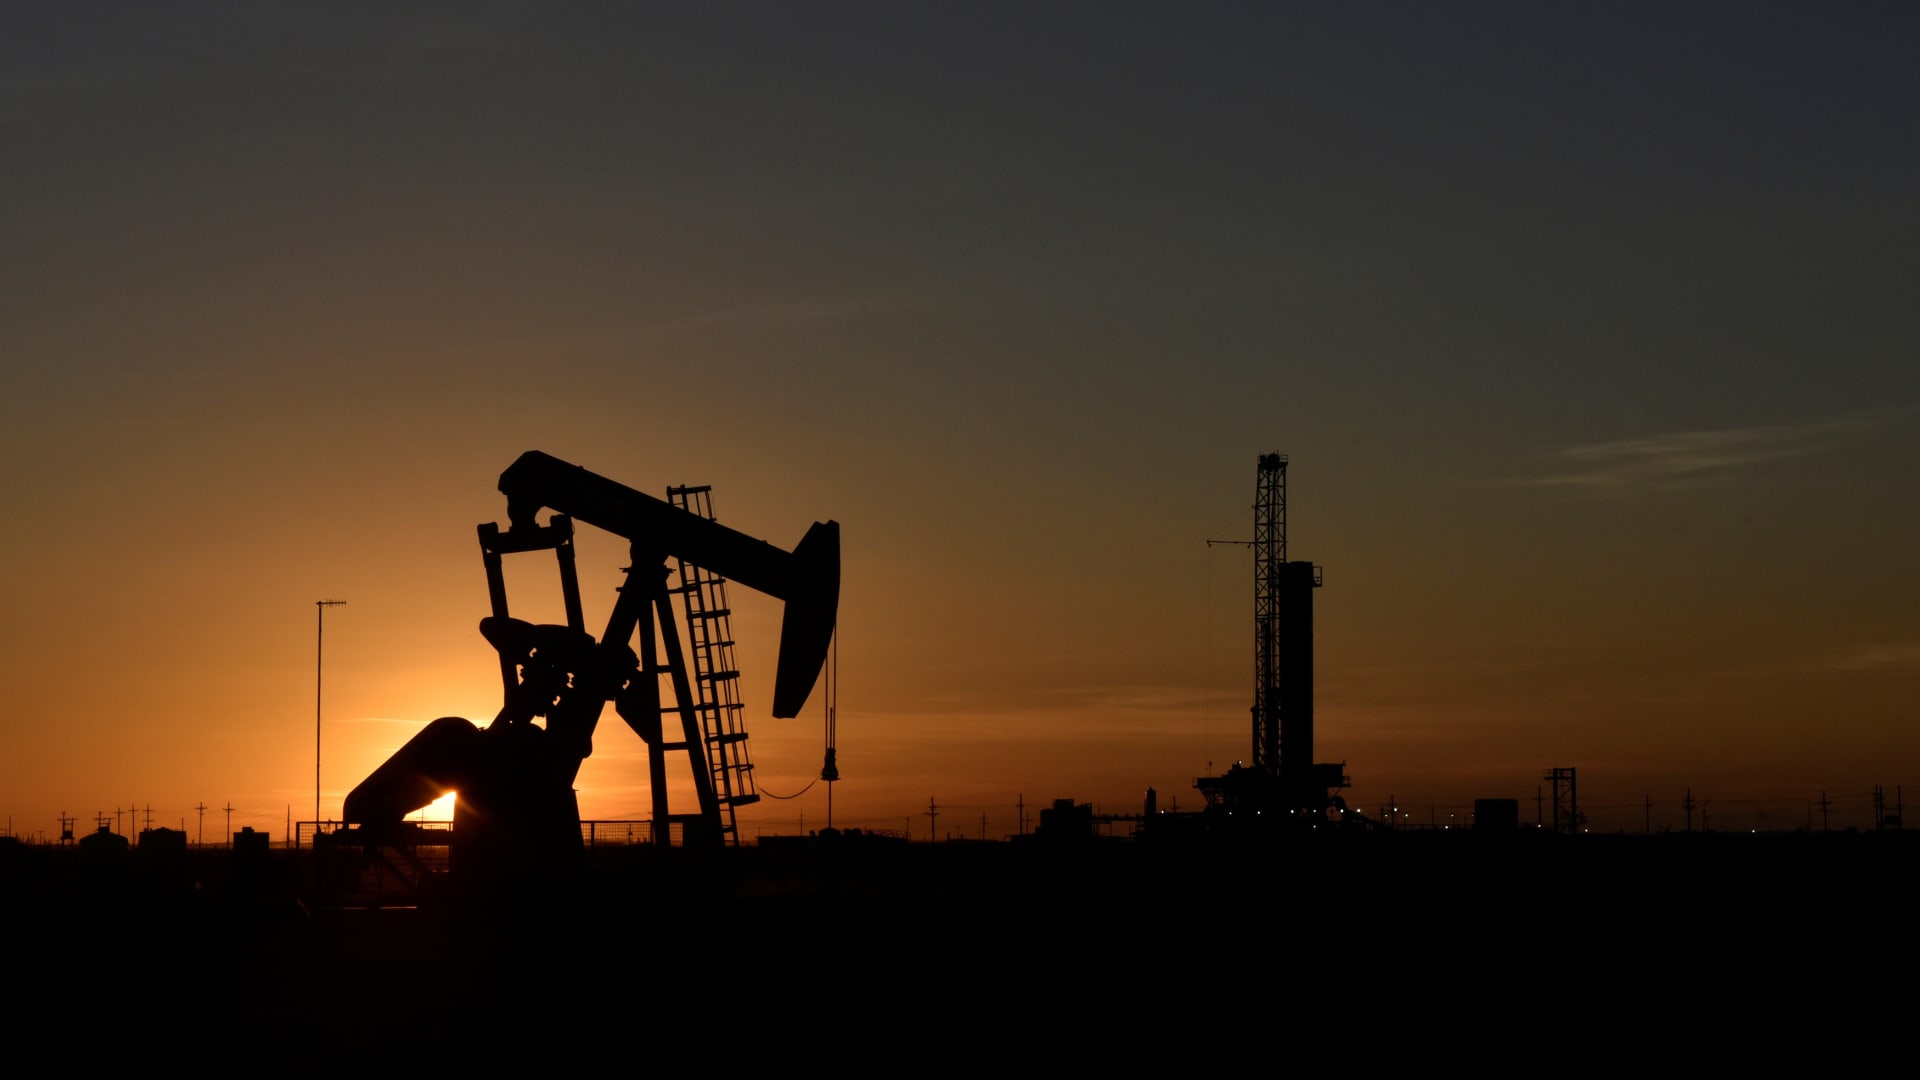 A pump jack operates in front of a drilling rig at sunset in an oil field in Midland, Texas.